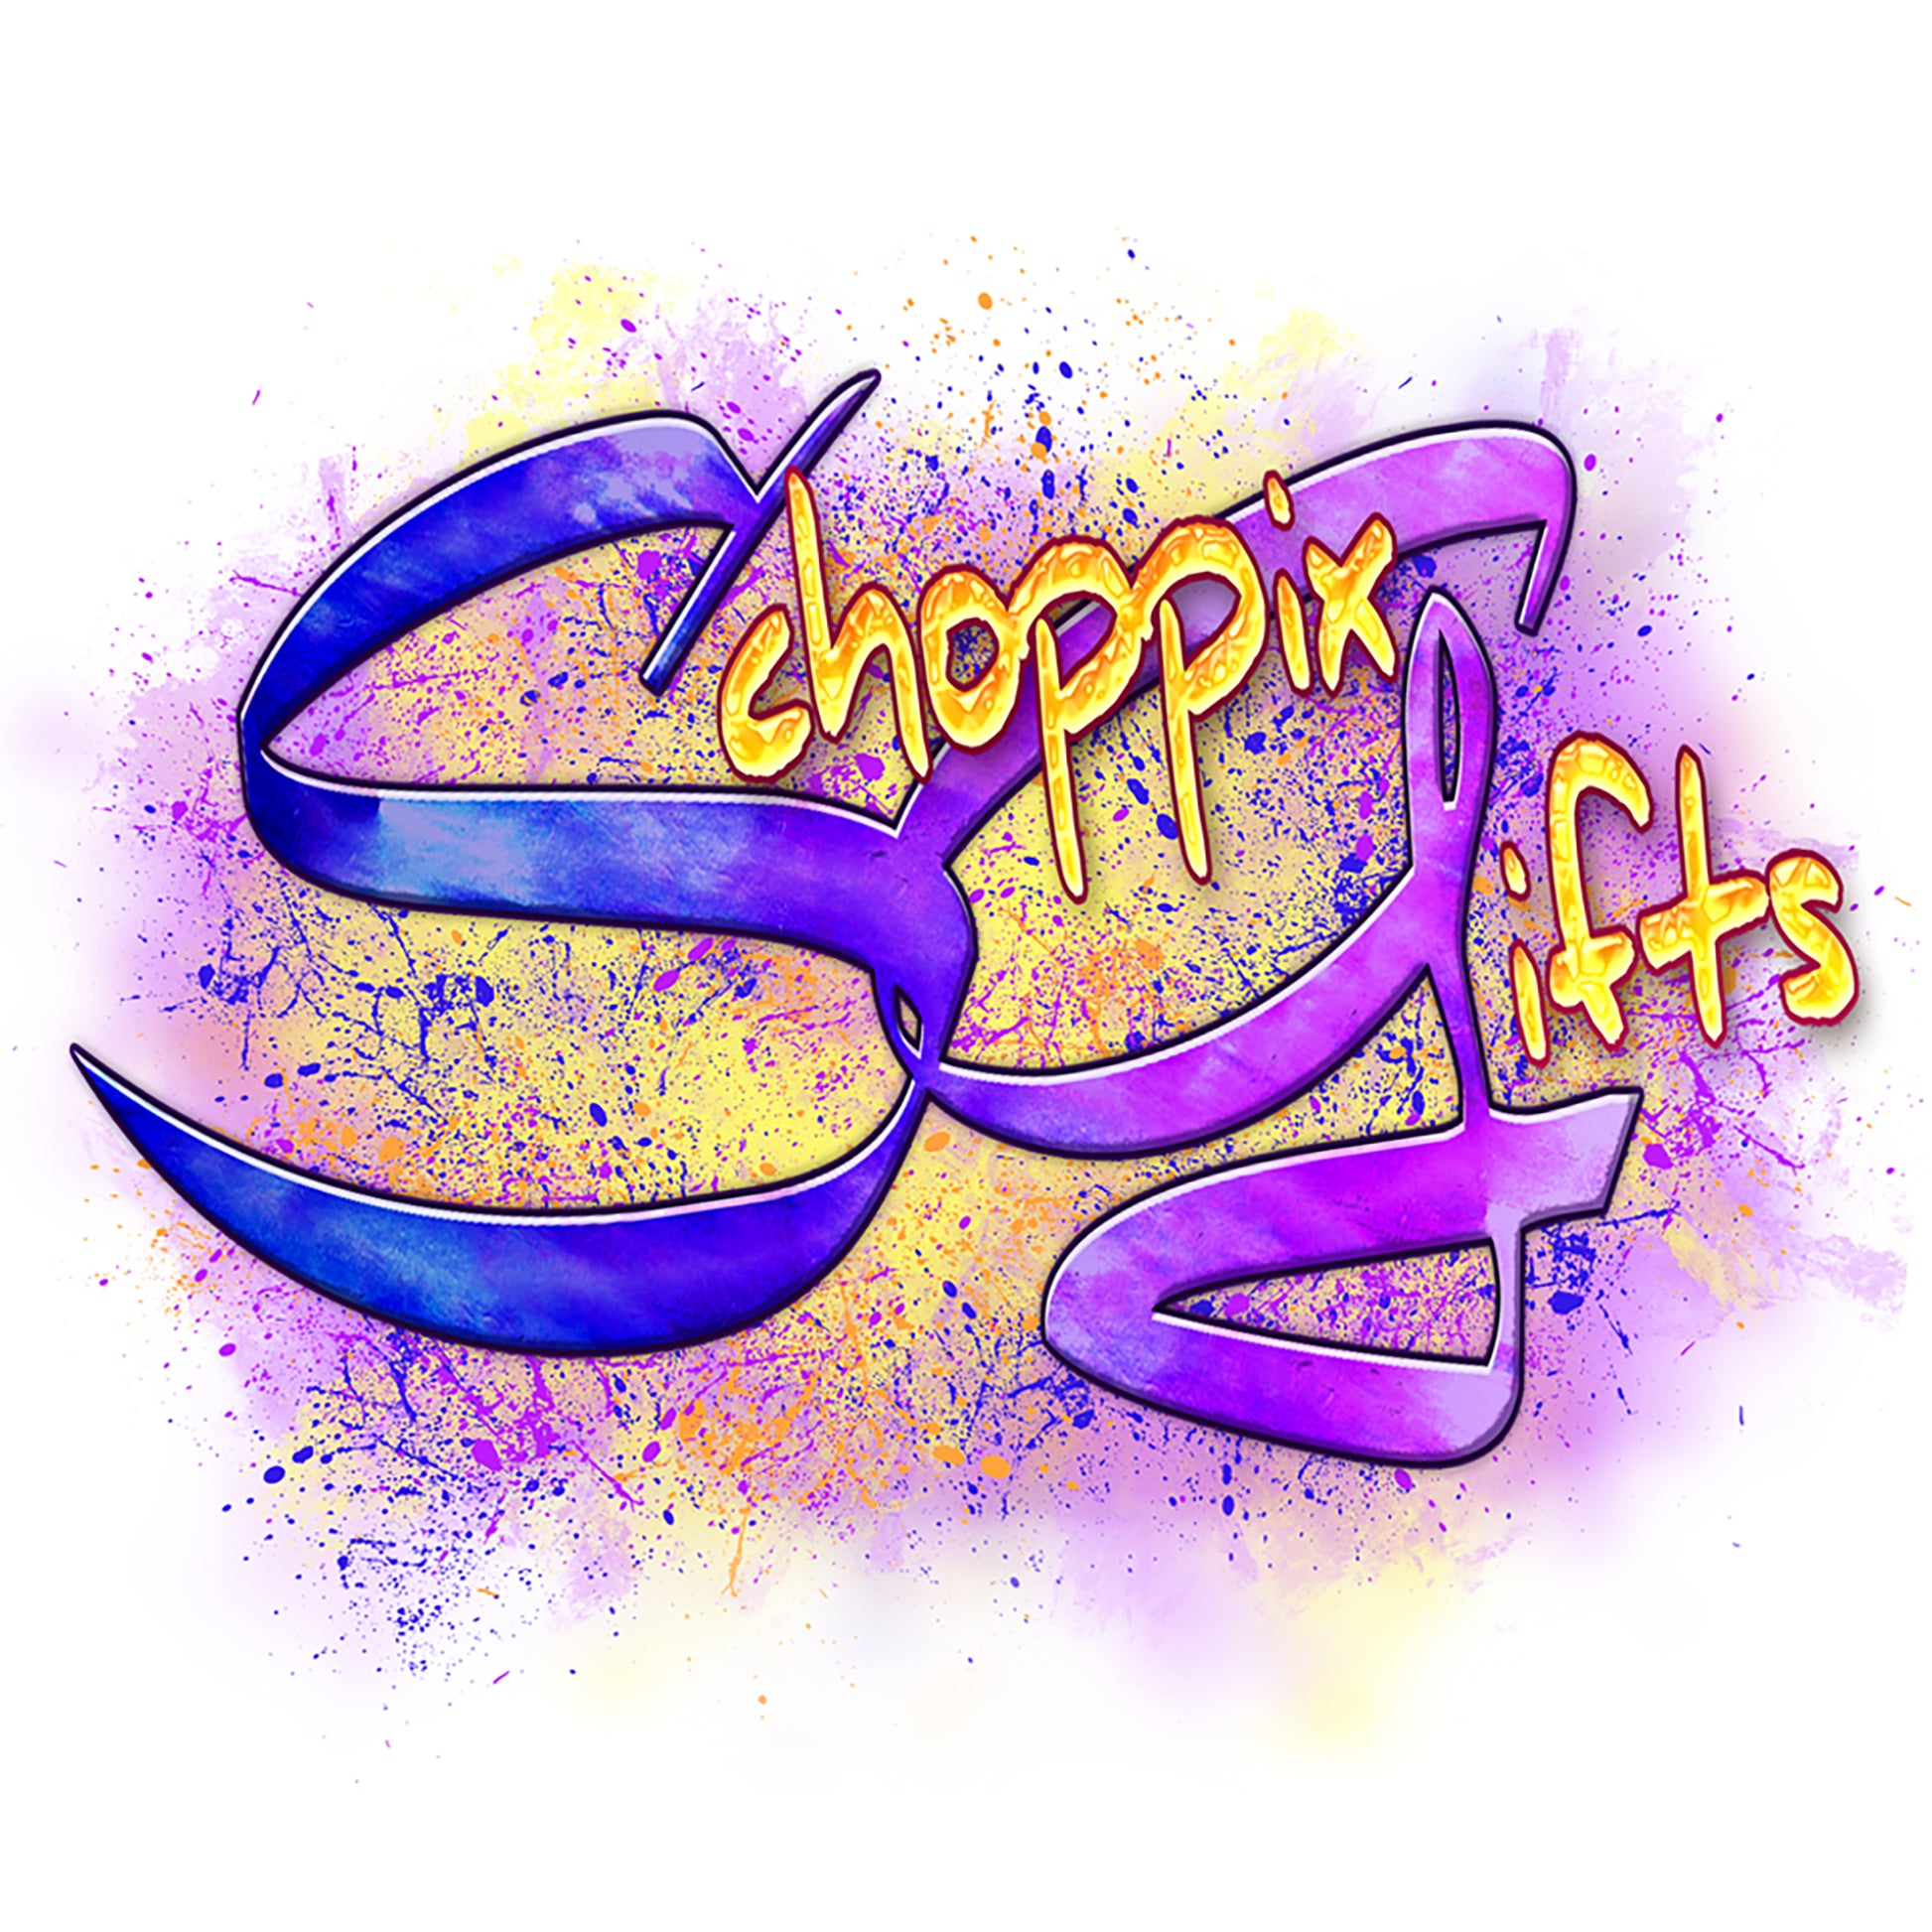 the word shoppix glits painted in purple and yellow